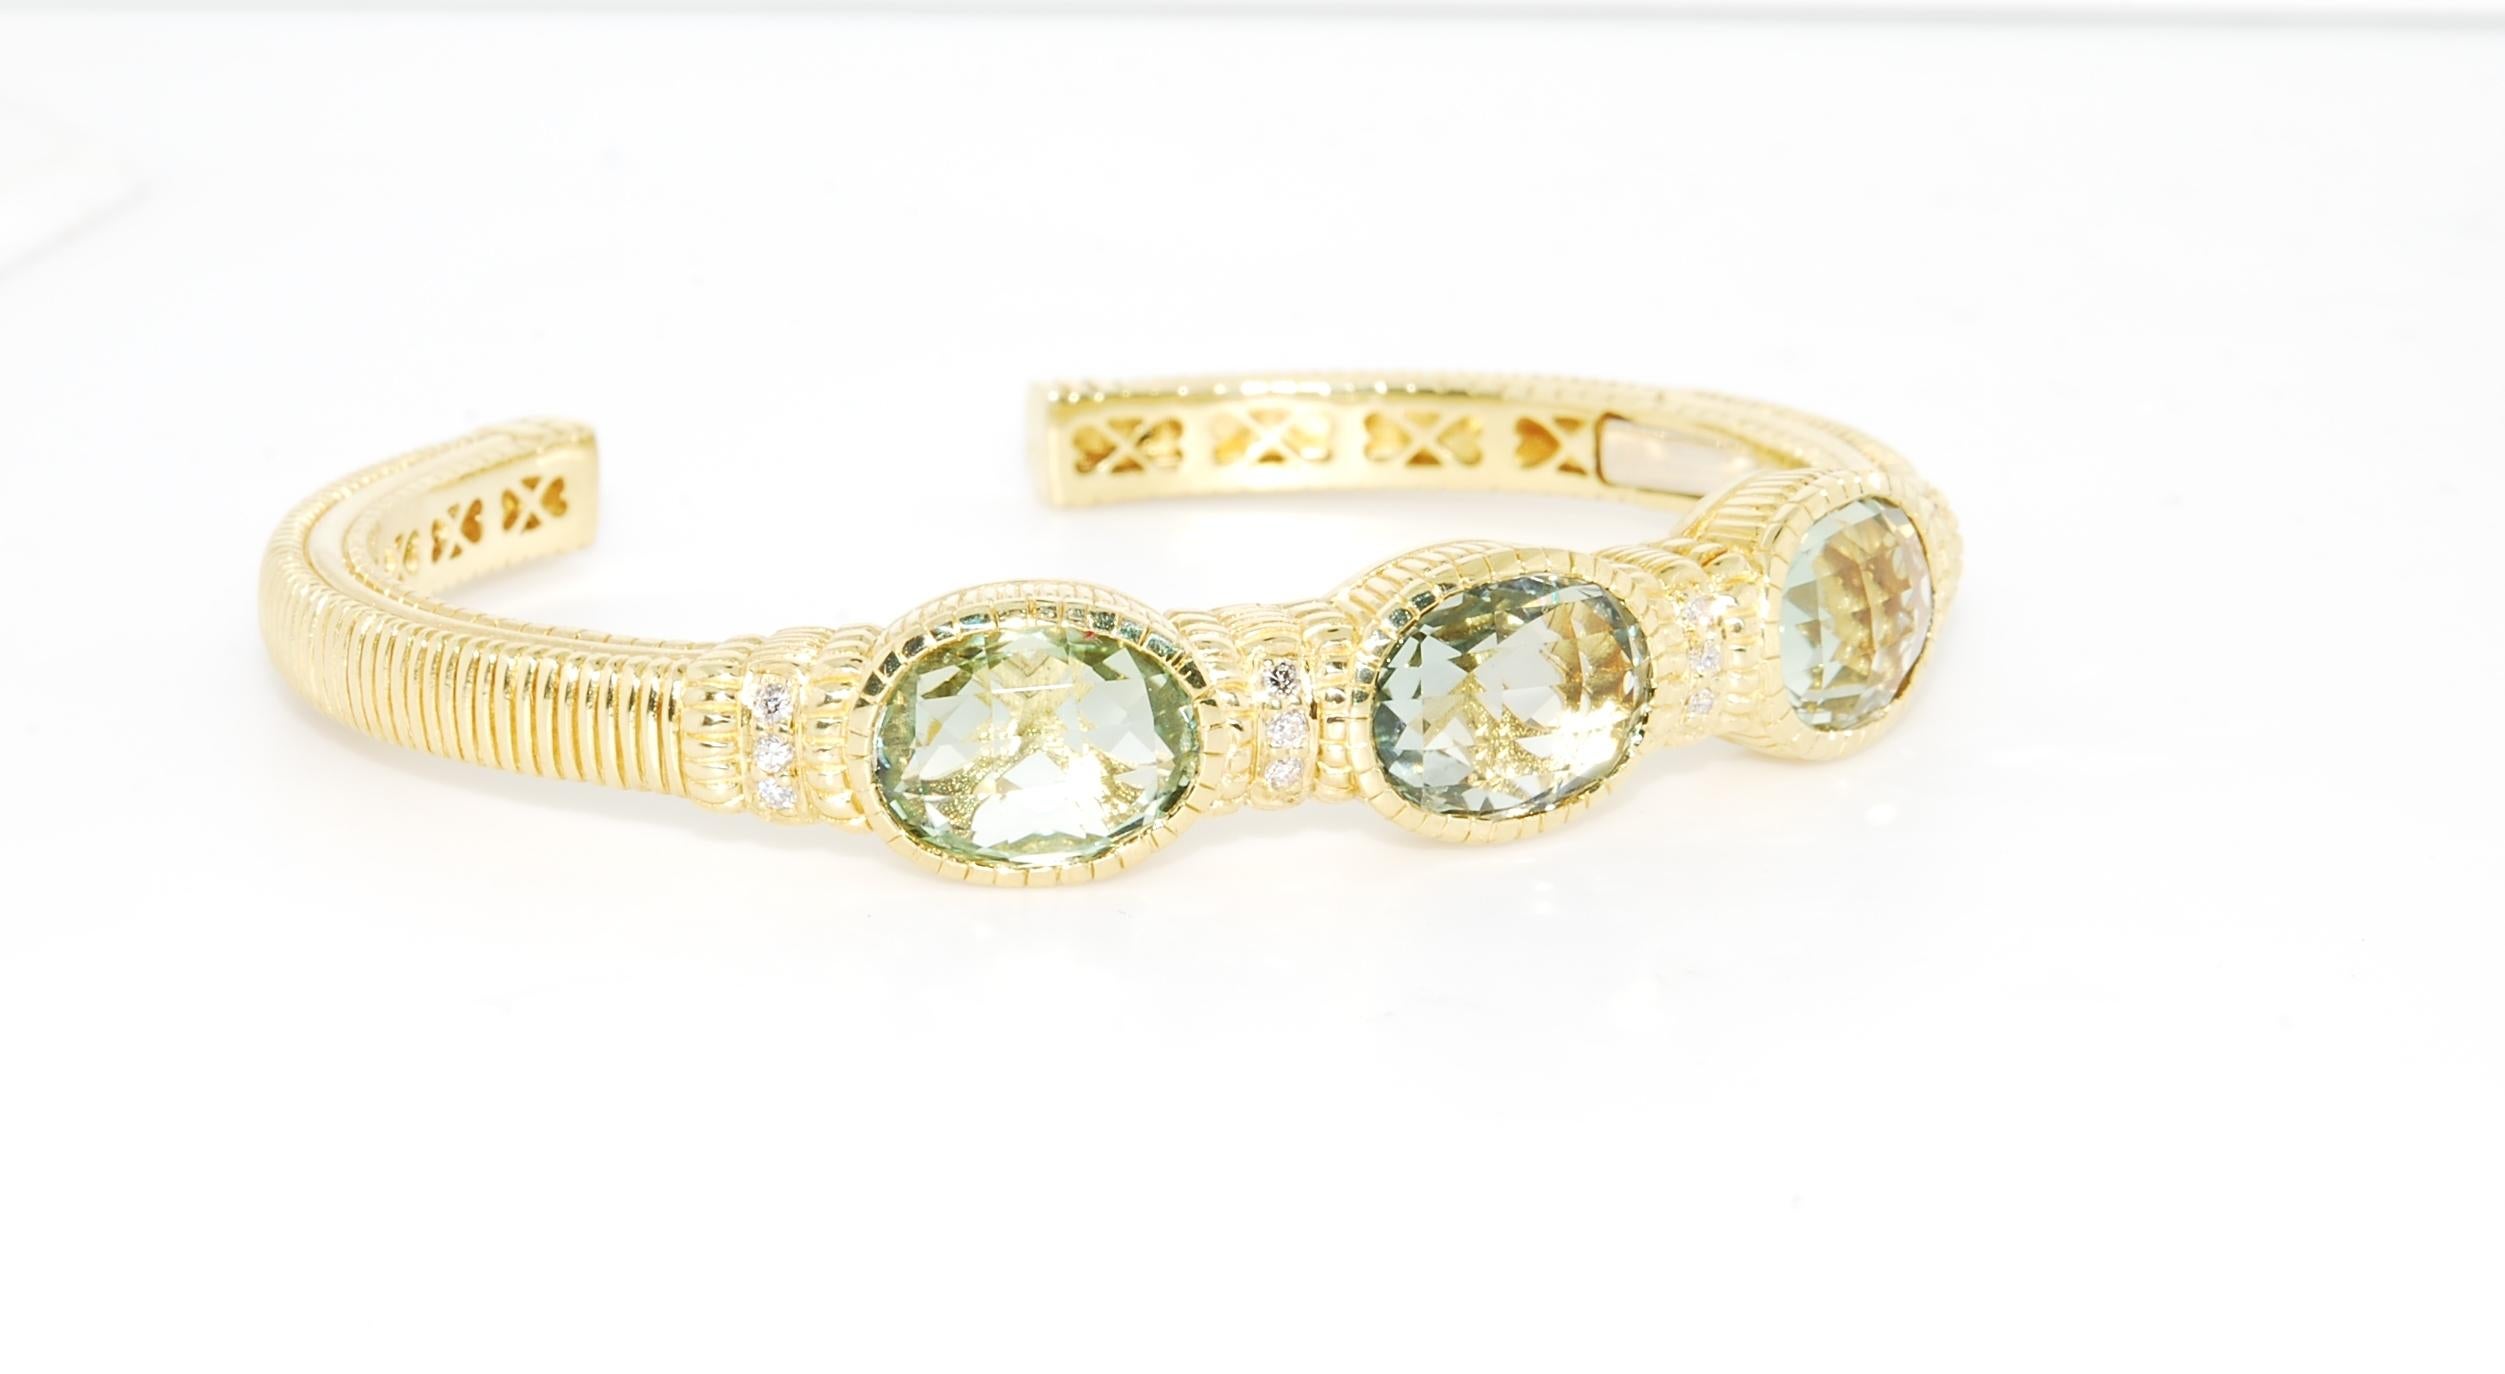 3 stone prasiolite Judith Ripka hinged cuff bracelet weighing 36.8 grams. The 3 prasiolites measure 12 x 10 mm's. The bracelet also has 12 - 1 point diamonds G/H SI clarity diamonds. Beautiful soft, rich look to this bracelet, and just the right